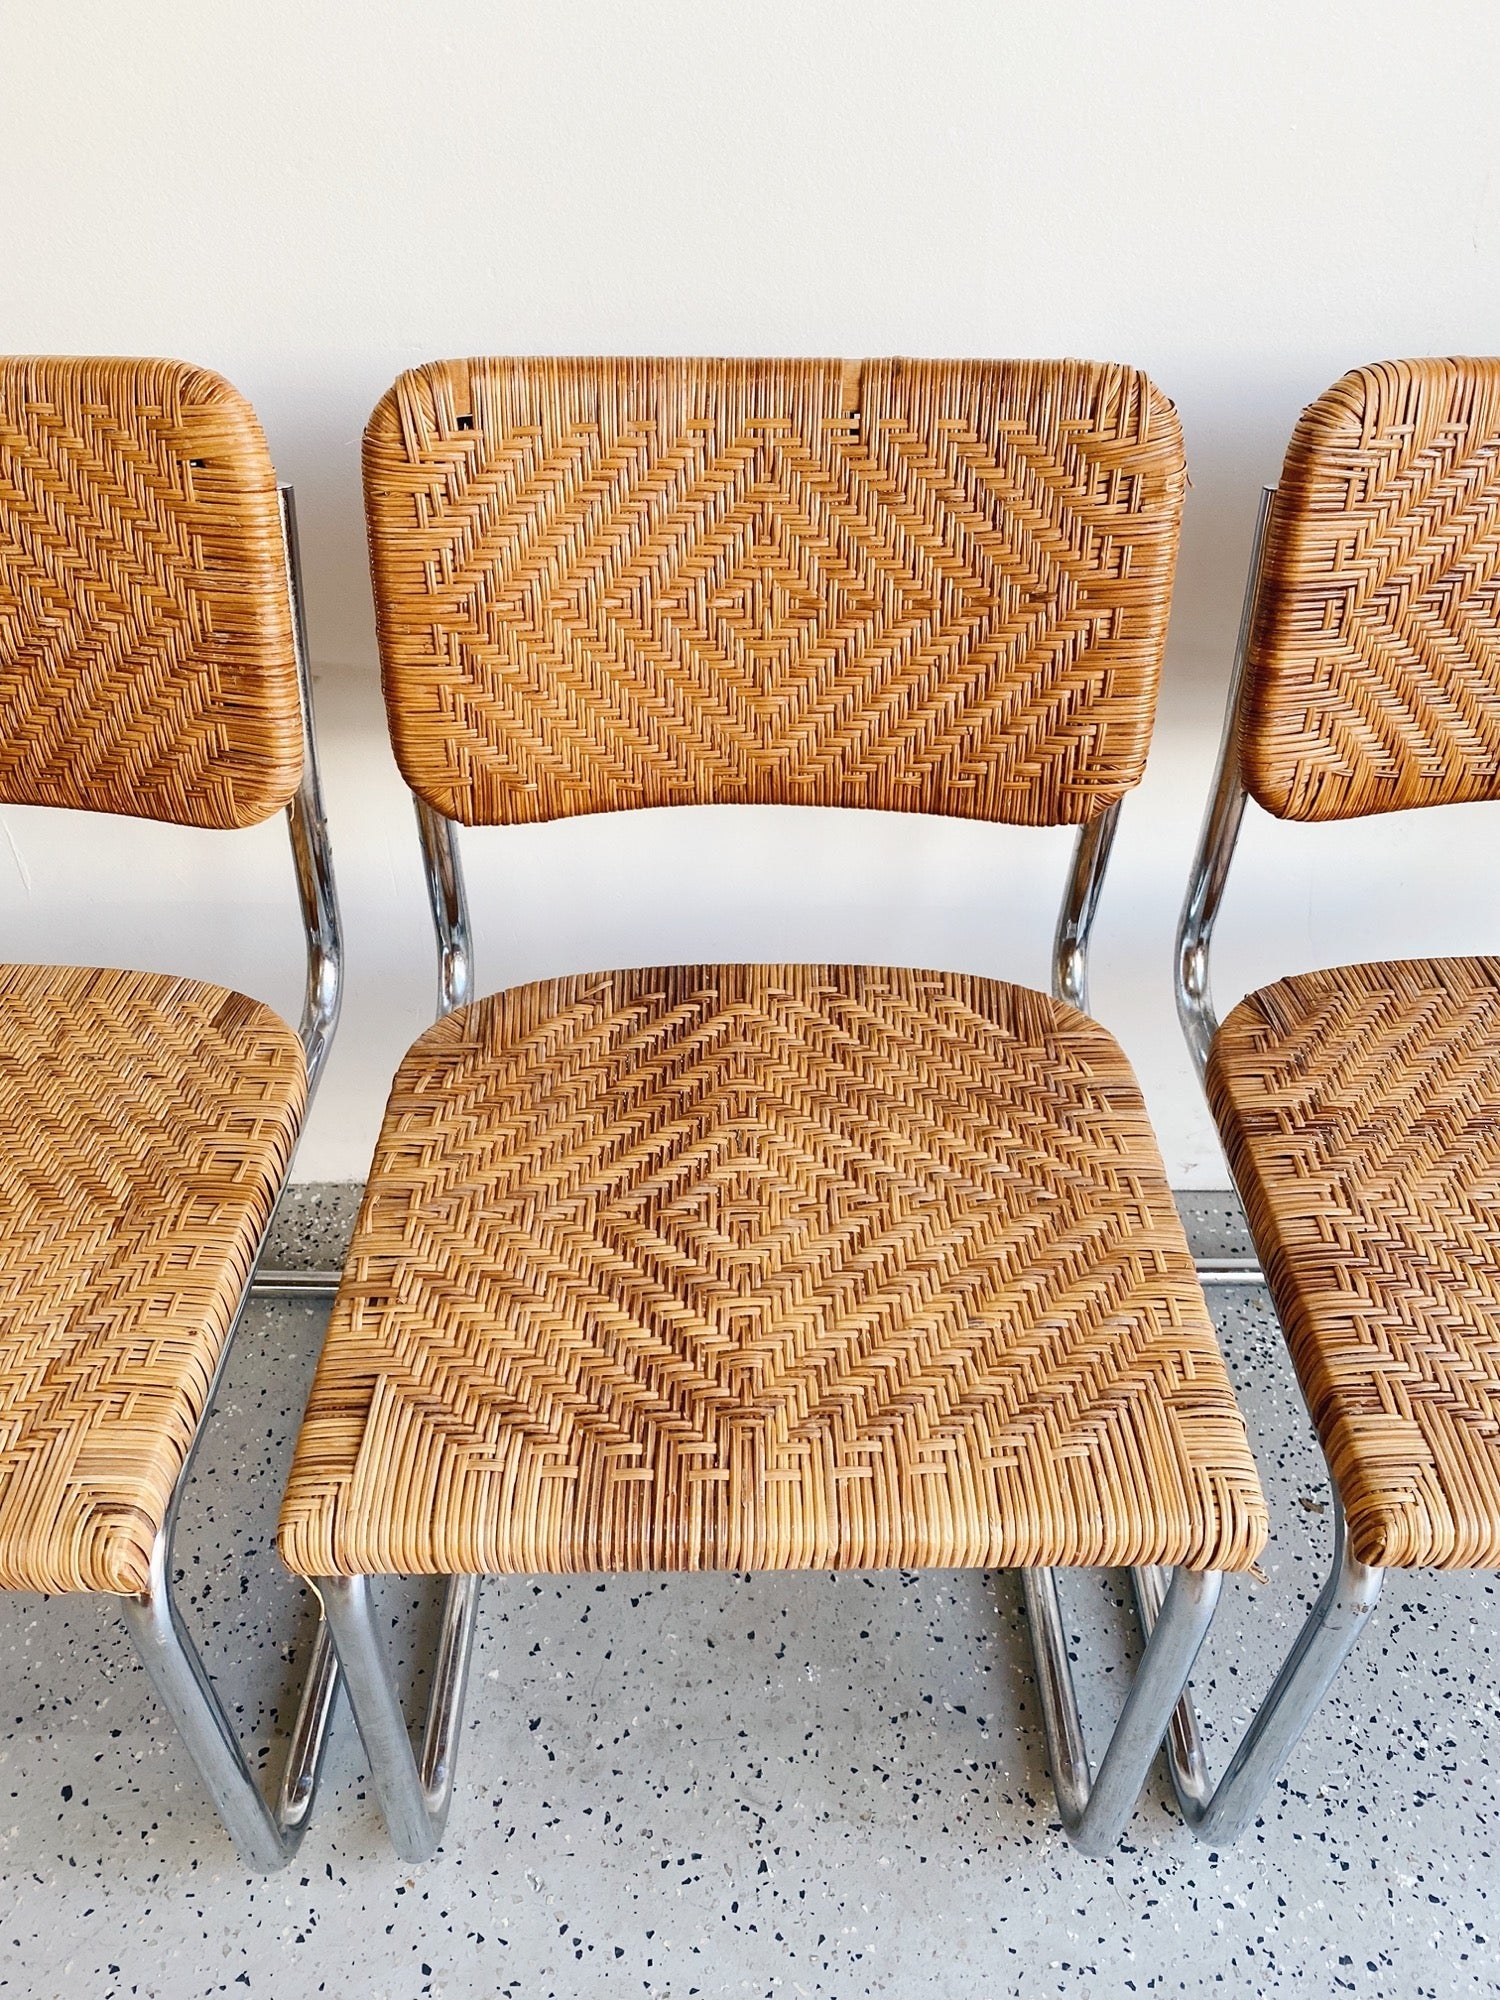 Woven Rattan Cantilever Chairs (x4) - Rehaus